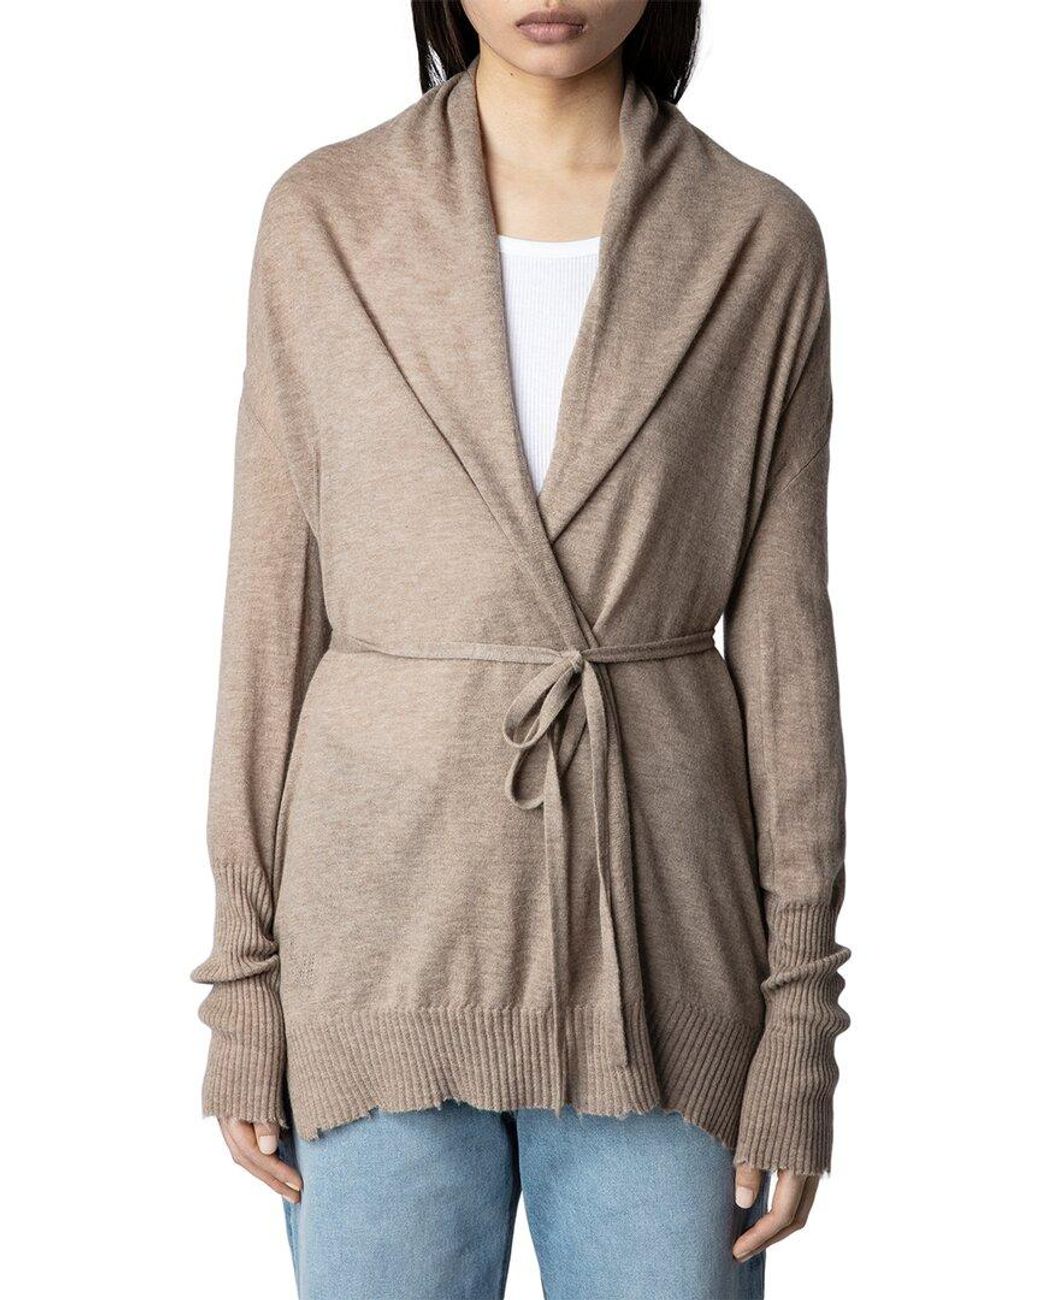 Zadig & Voltaire Hazzel Cp Cashmere Cardigan in Natural | Lyst